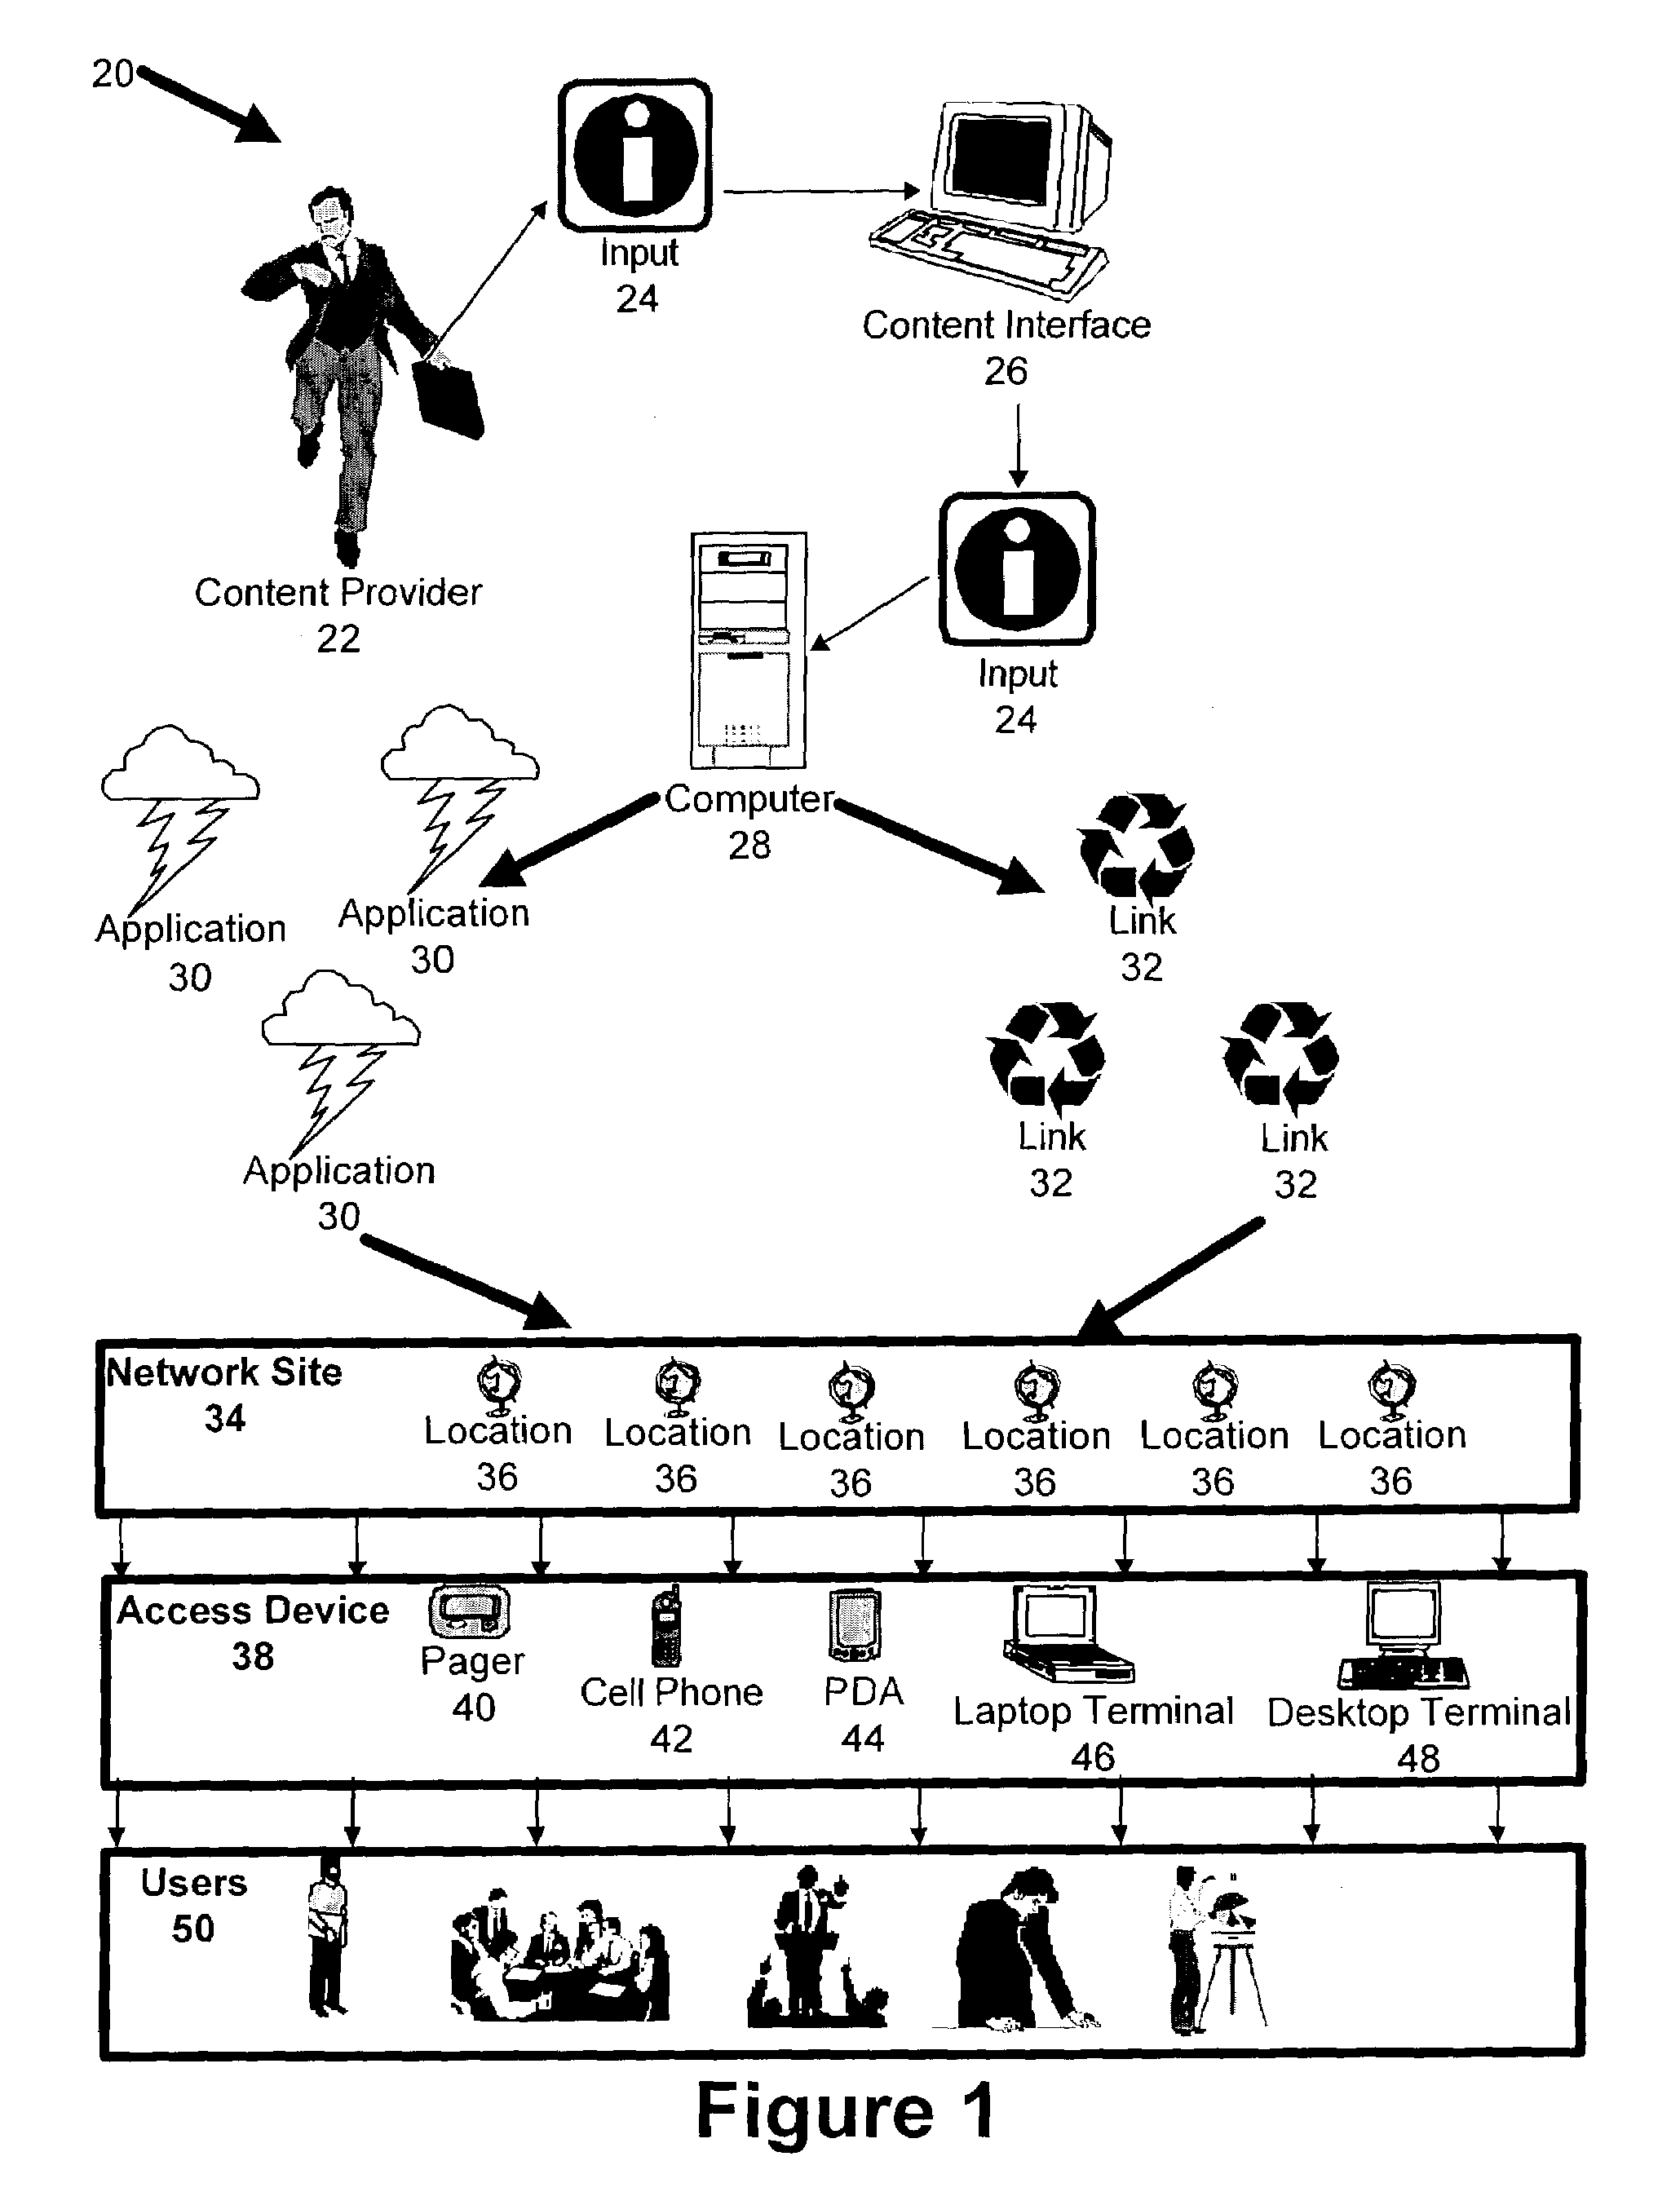 System and method for managing content on a network interface